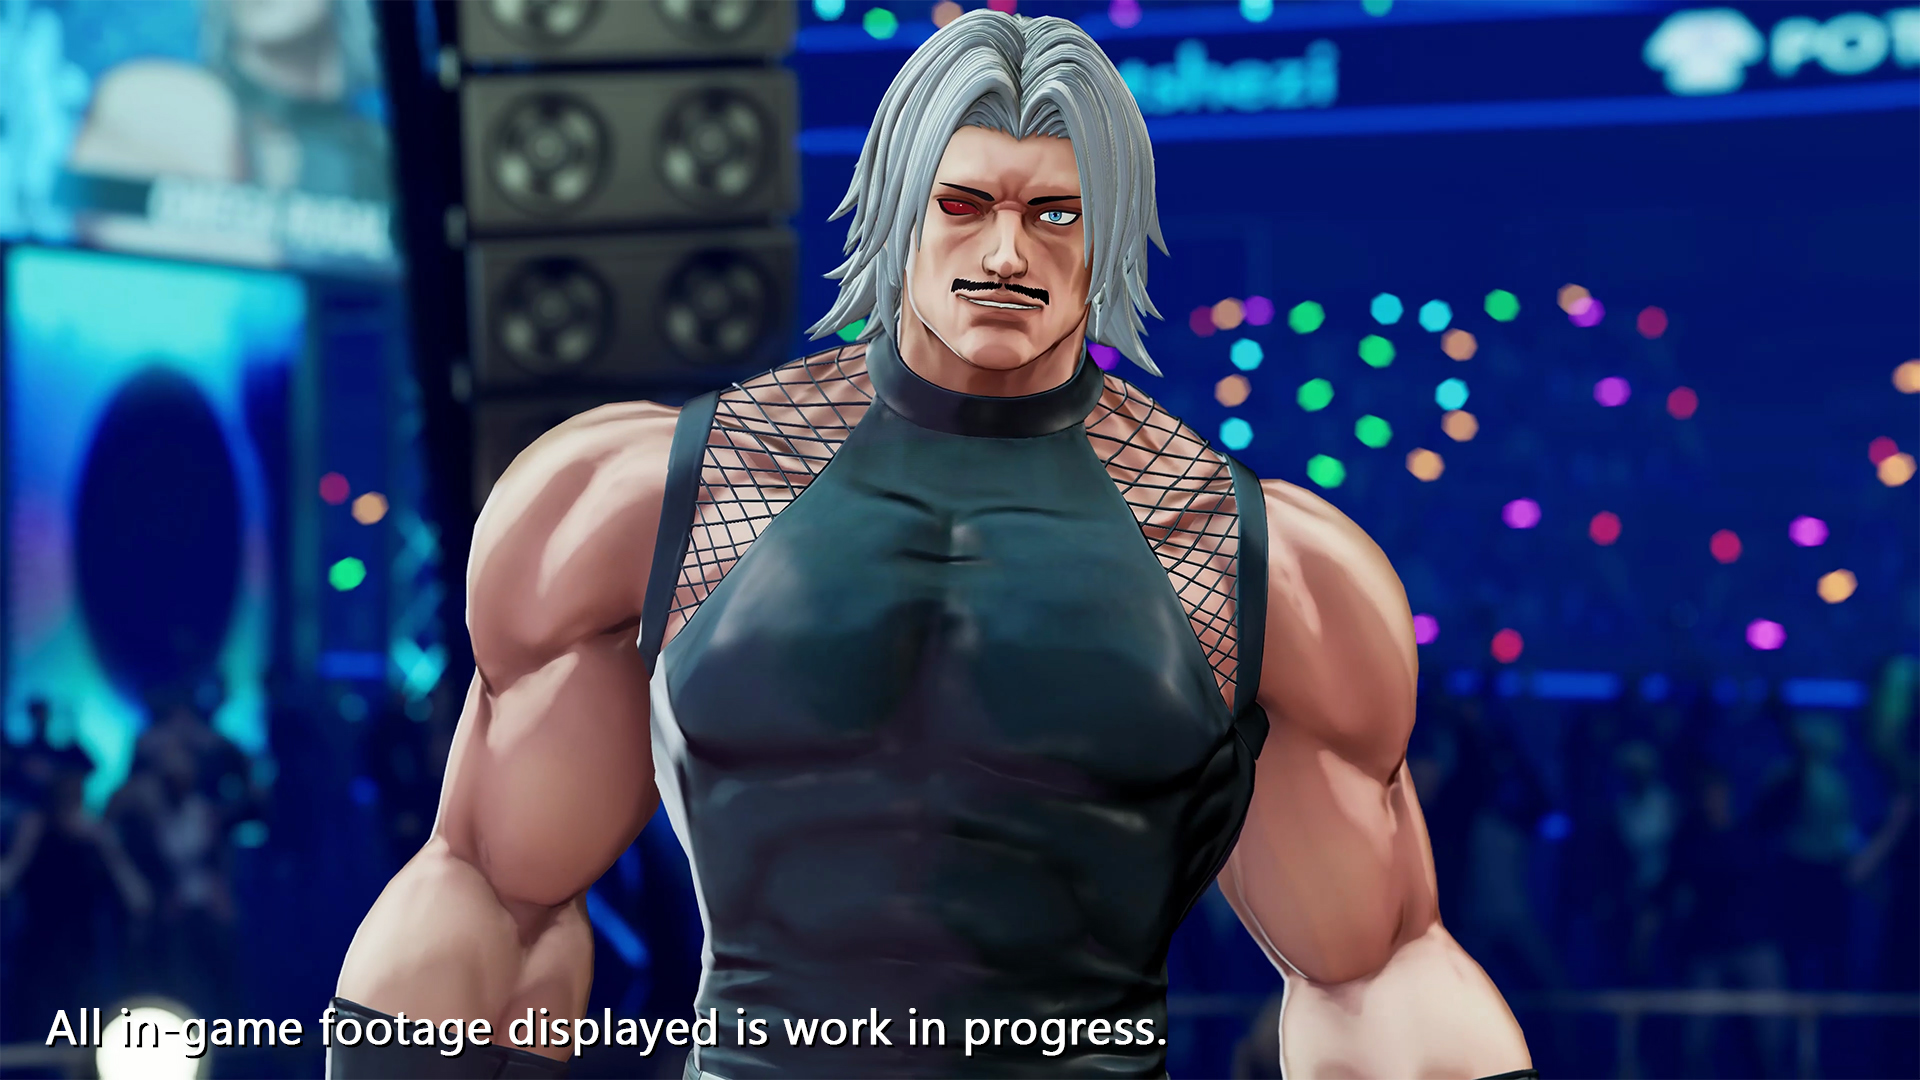 The King of Fighters XV Review - In Fighting Fashion